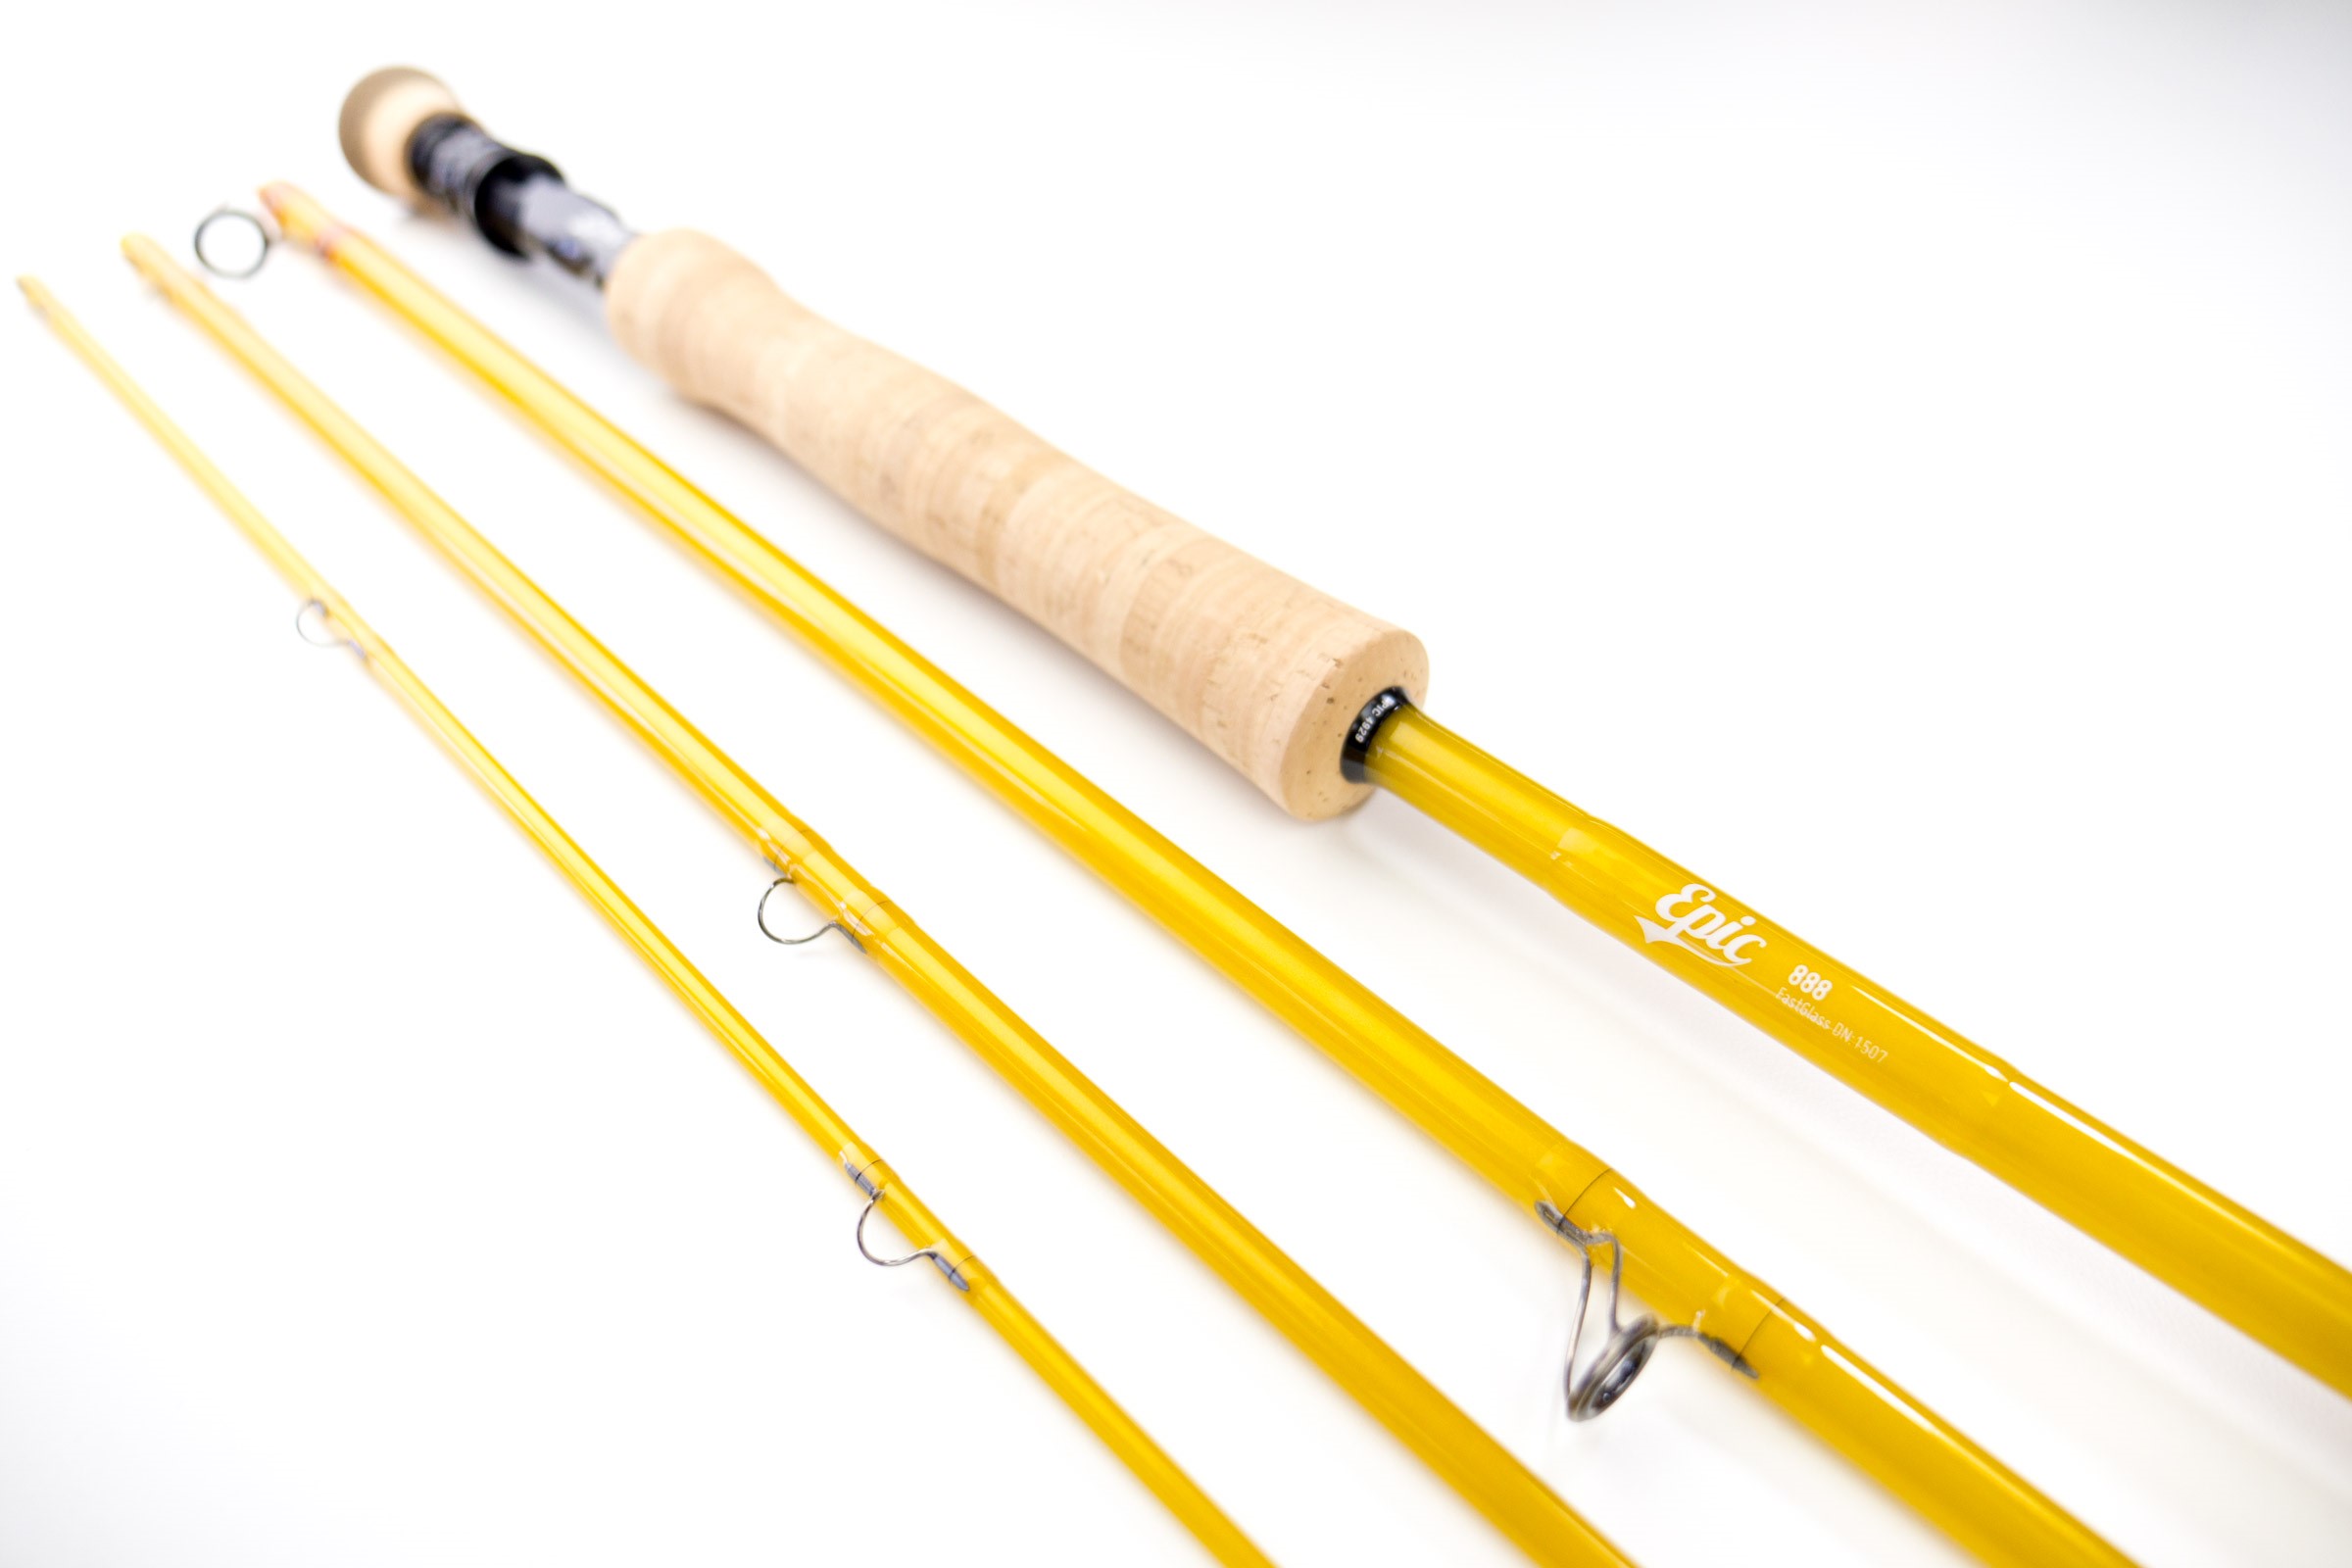 ROD REVIEW – EPIC FASTGLASS 888 FLY ROD